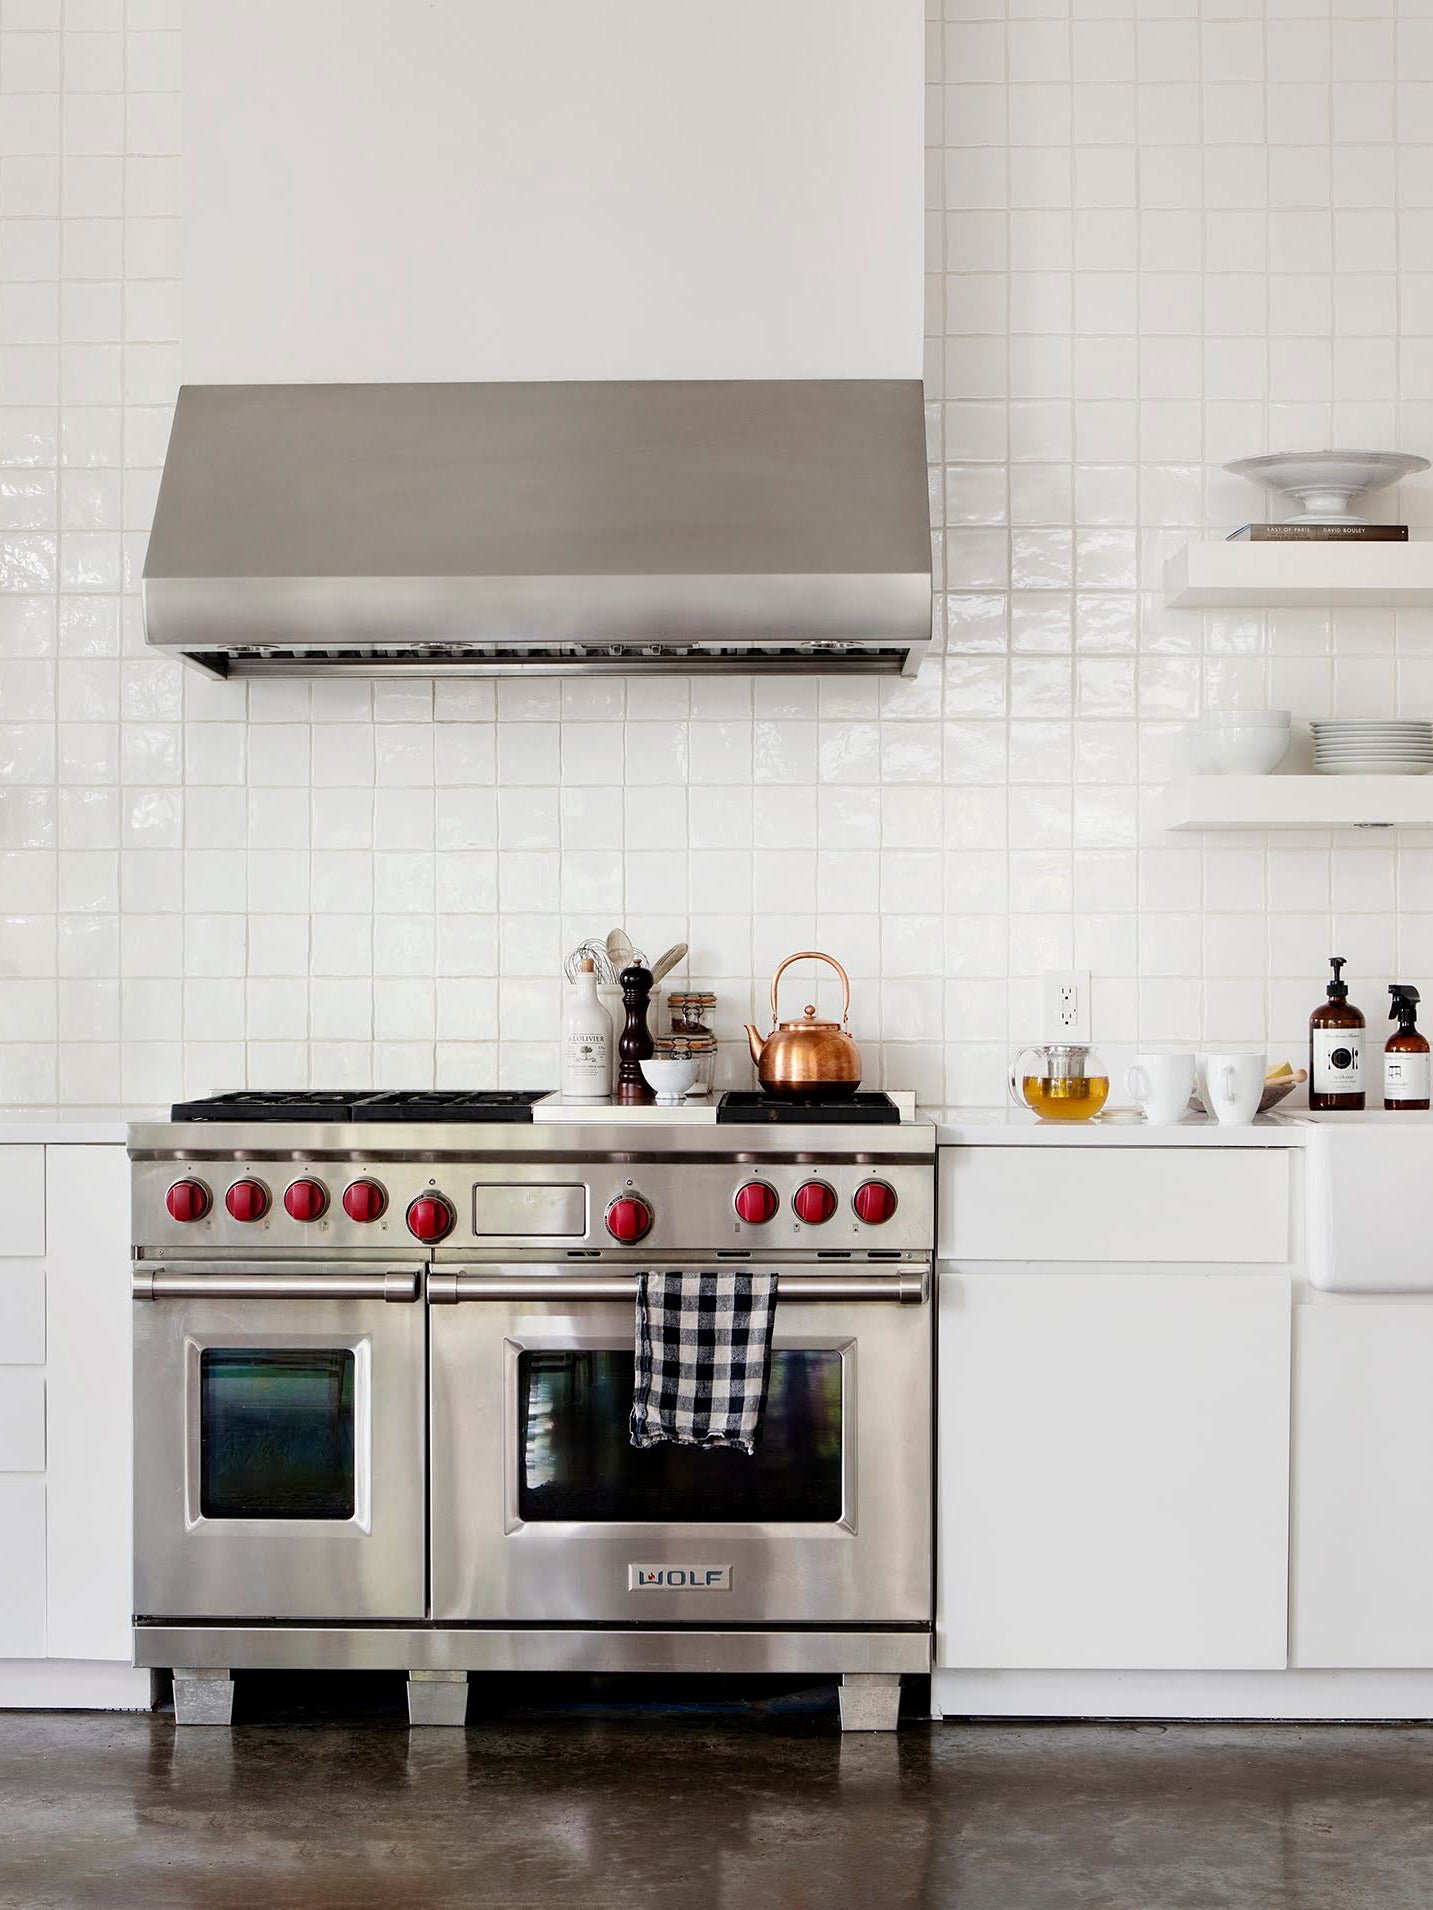 How to Organize Your Kitchen, According to a Former Private Chef